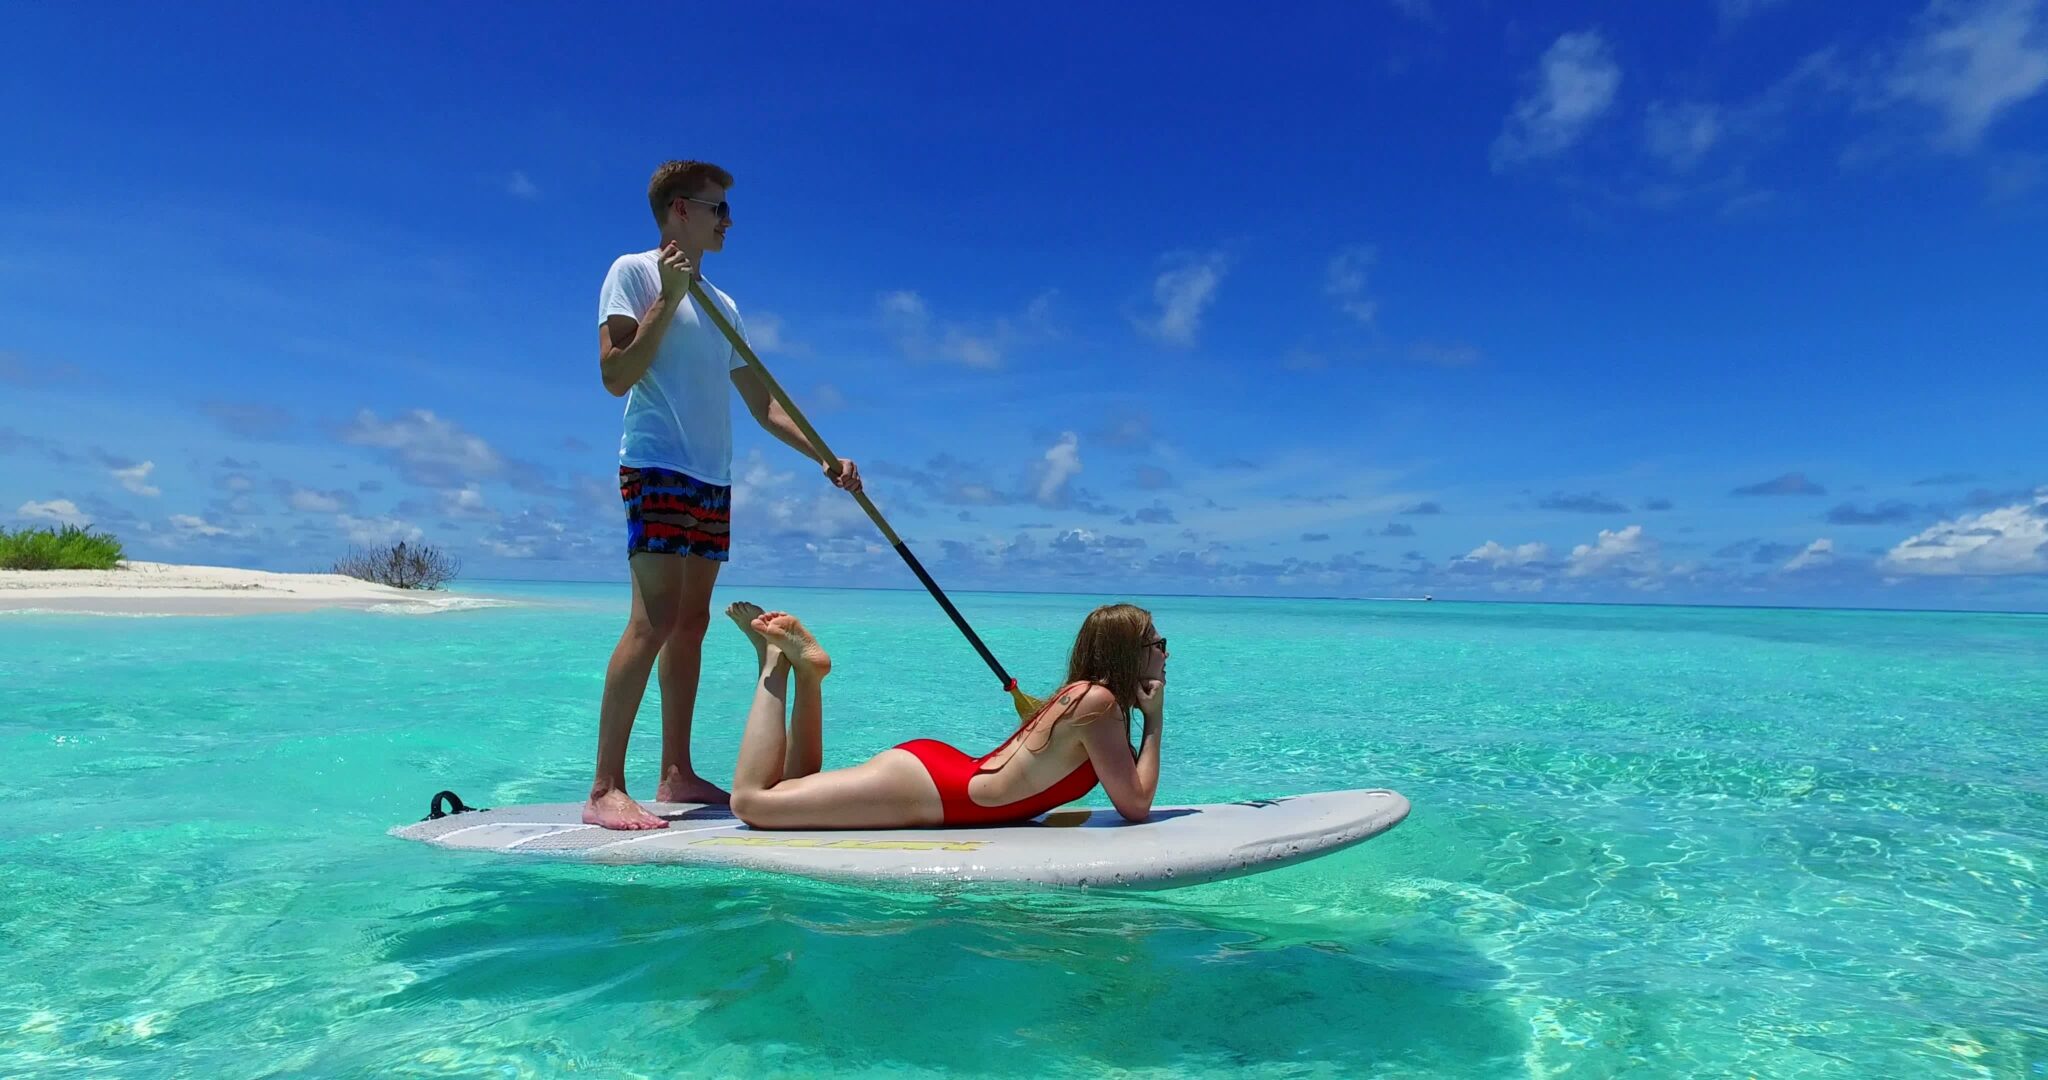 Male and female couple on white stand-up paddle boarding on turquoise ocean in Turks and Caicos